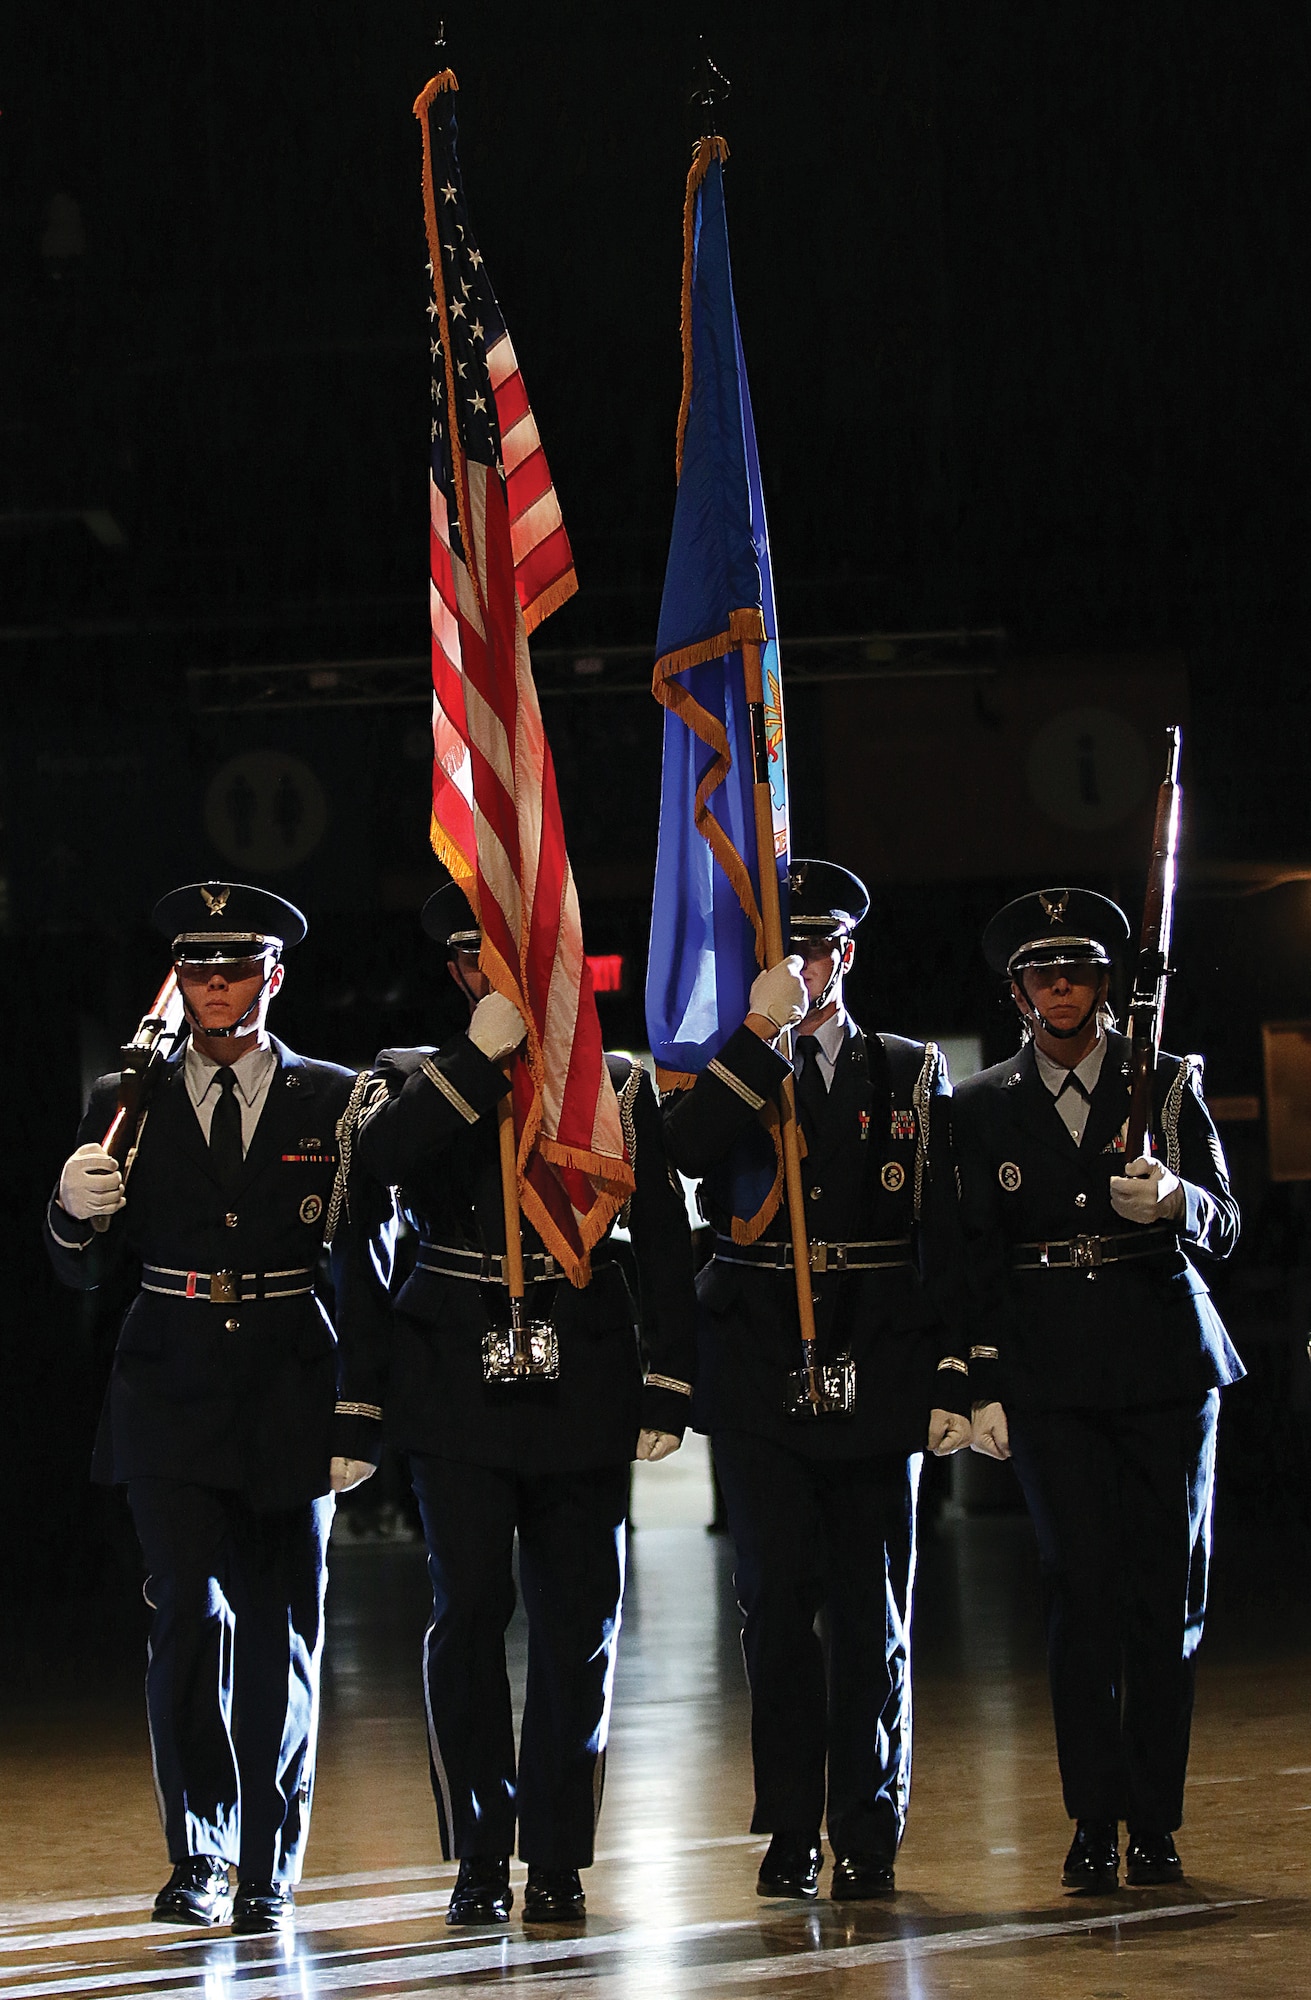 The 445th Honor Guard posts the Colors at the 445th Airlift Wing’s annual awards banquet April 7, 2018.